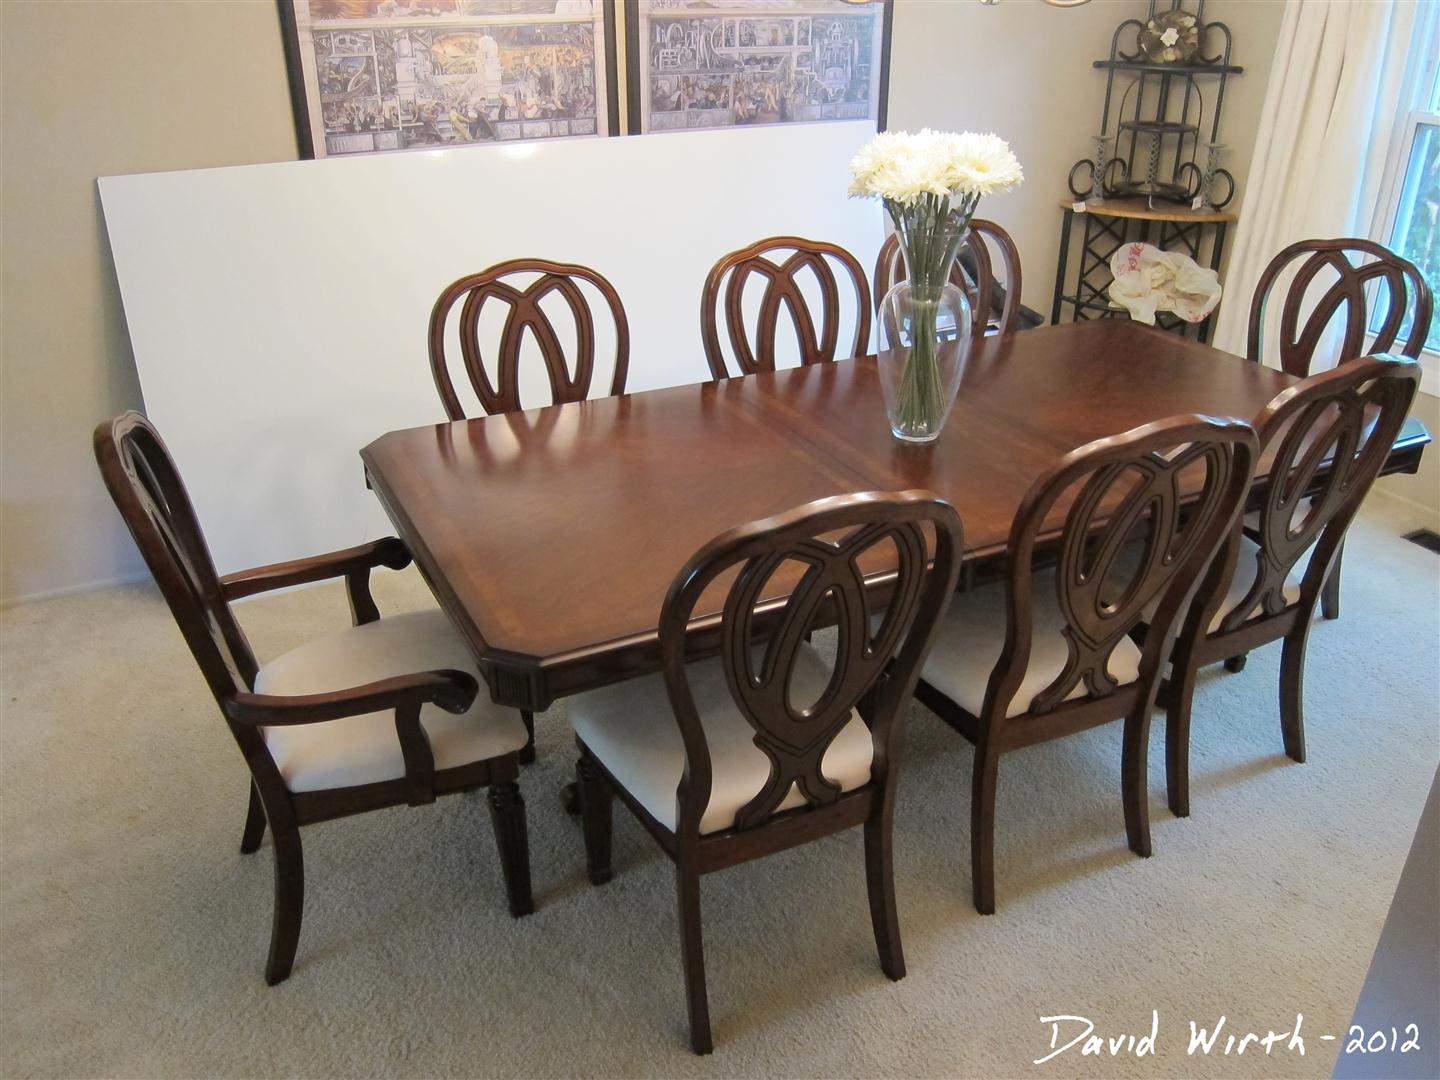 New Dining Room Table And Chairs, Craigslist Dining Room Table